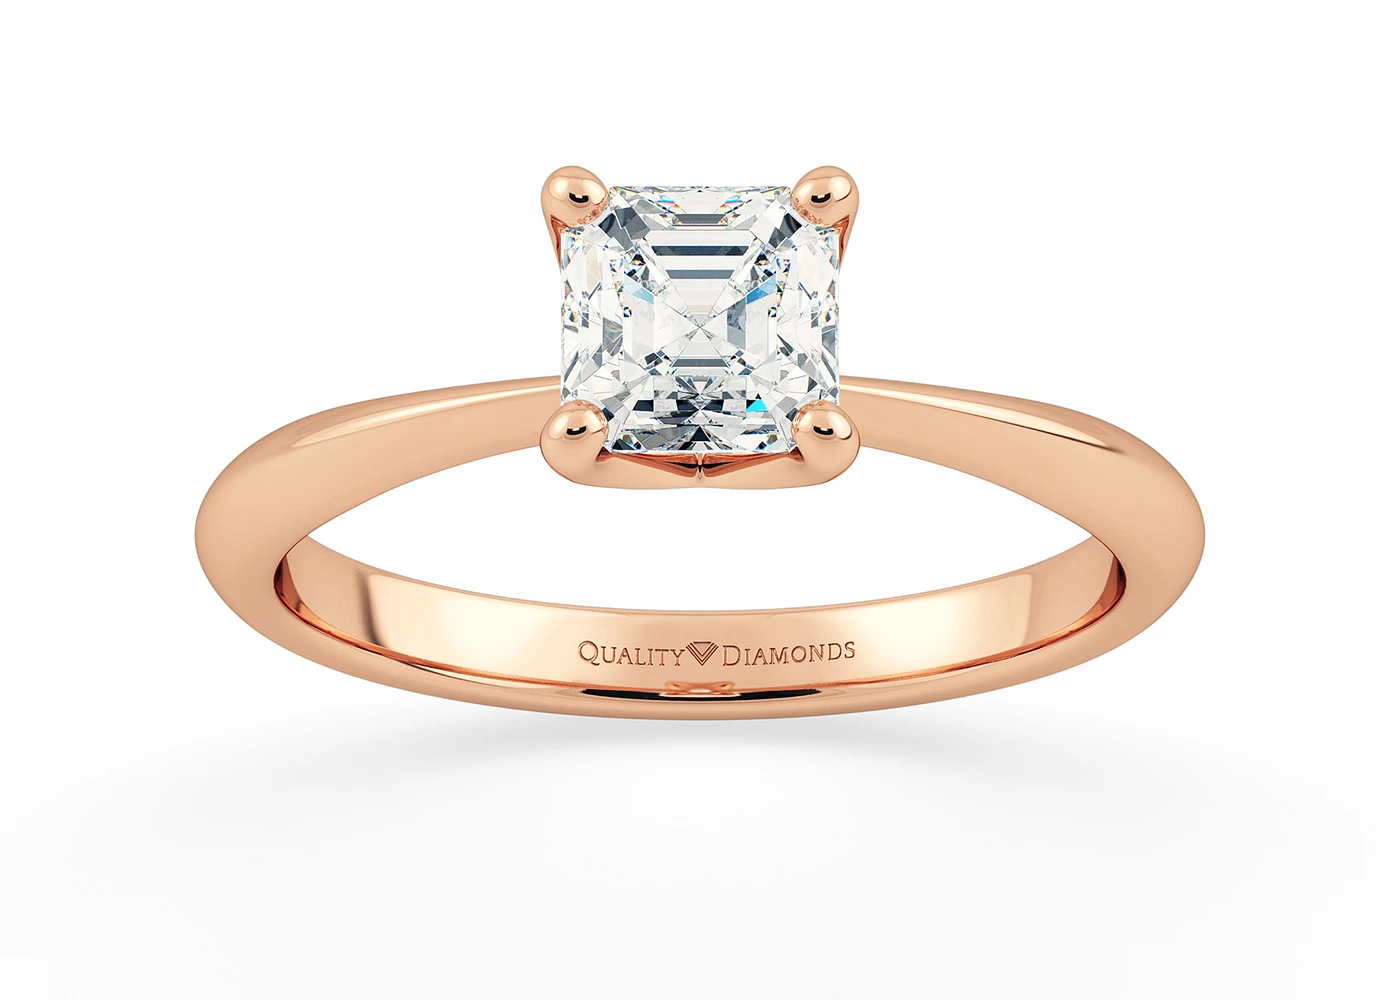 Two Carat Asscher Solitaire Diamond Engagement Ring in 18K Rose Gold